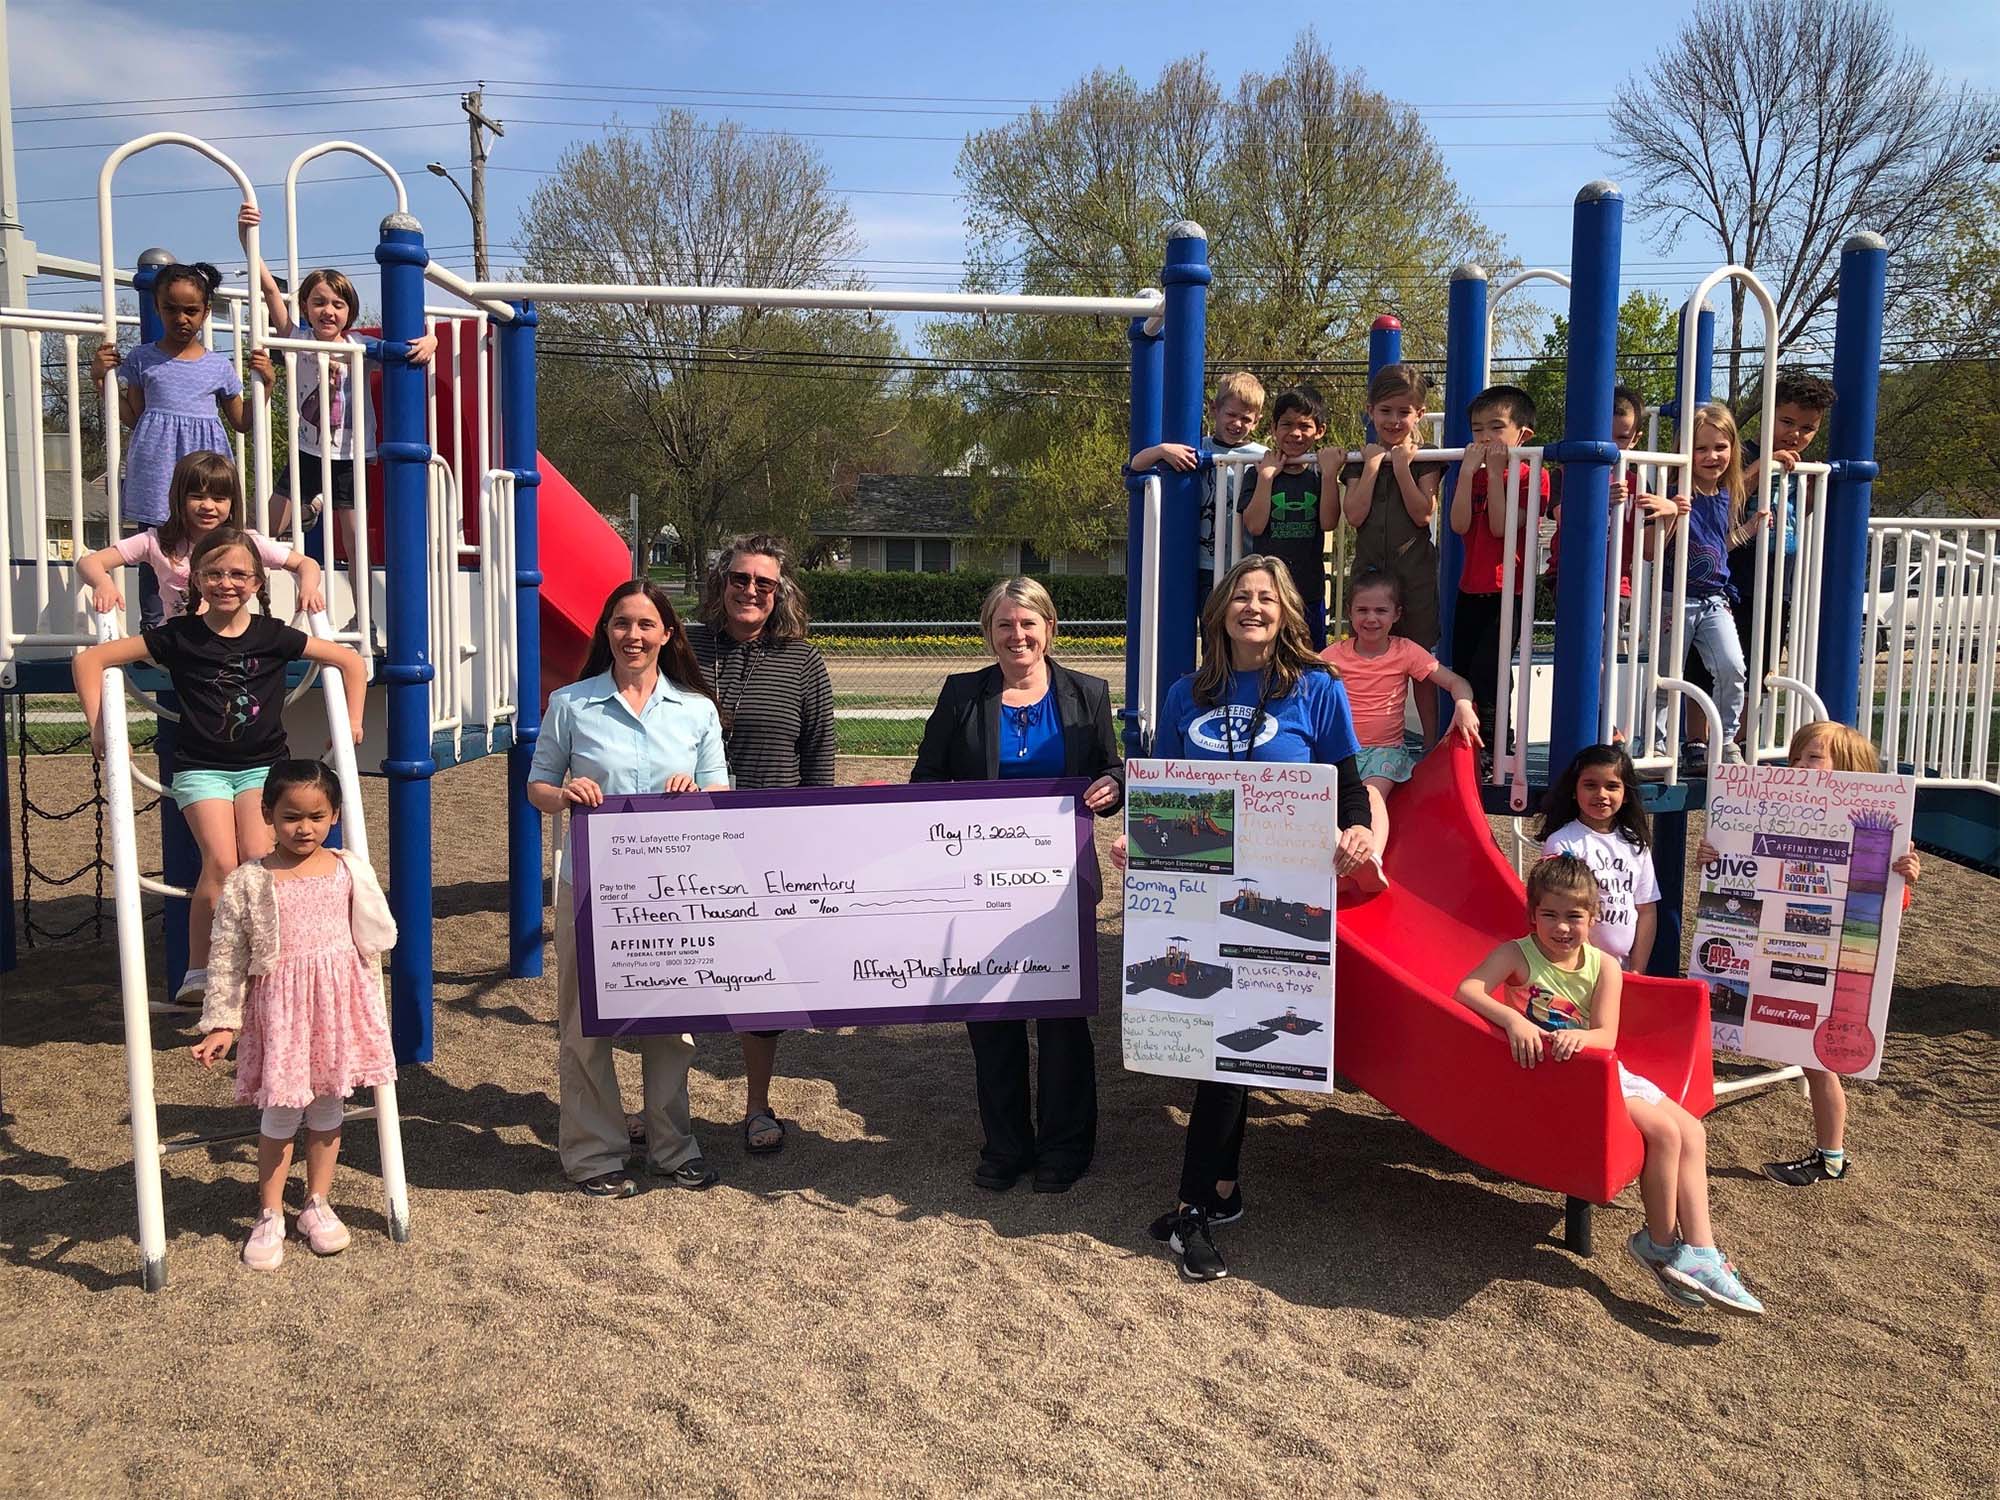 A group at a playground holding a check